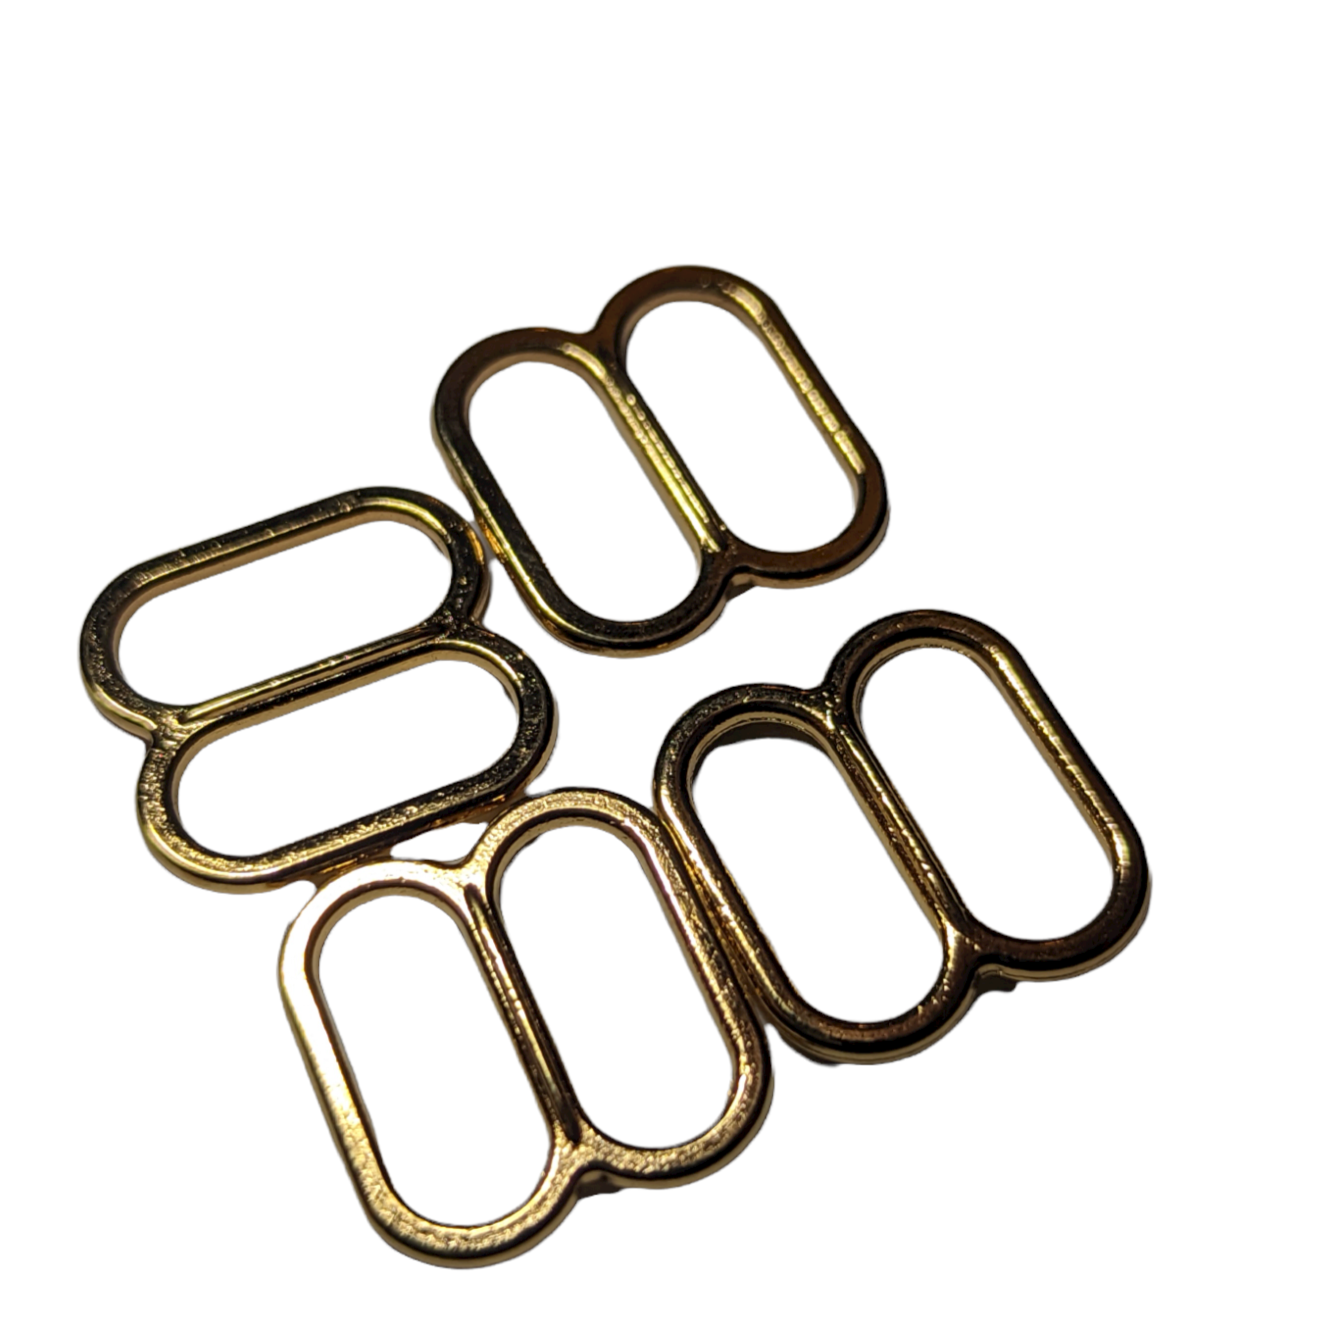 Slider /  Adjuster XXL - Gold Plated Zamak - Double High - 4 sizes - Allied Trimmings Inc